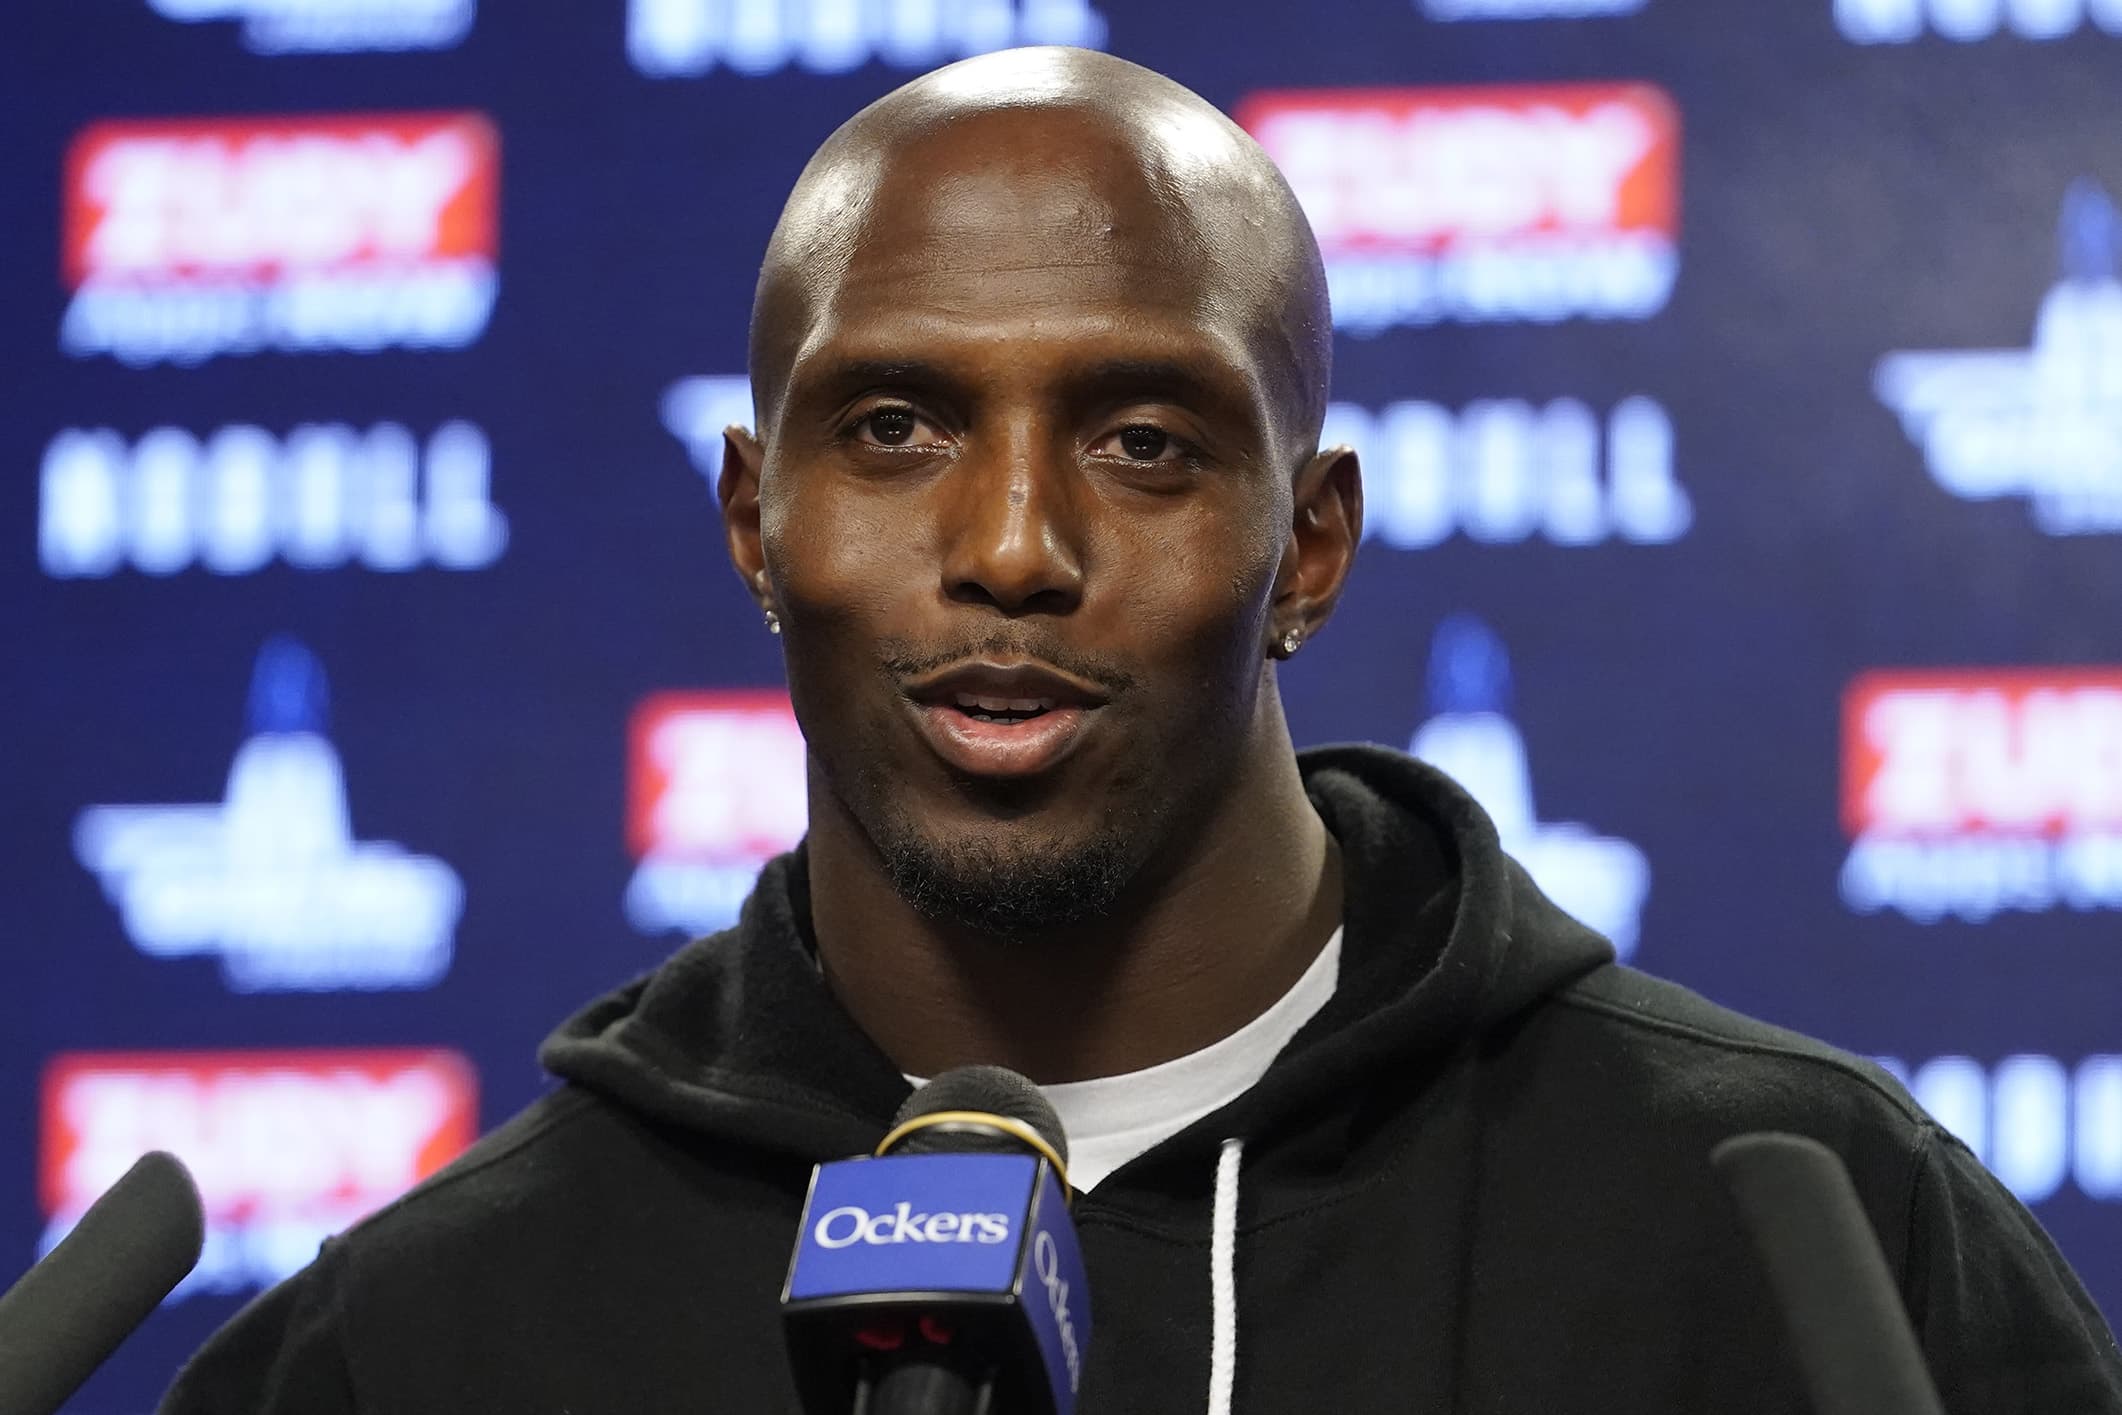 New England Patriots safety Devin McCourty faces reporters following an NFL football practice, Wednesday, Dec. 21, 2022, in Foxborough, Mass. (Steven Senne/AP)